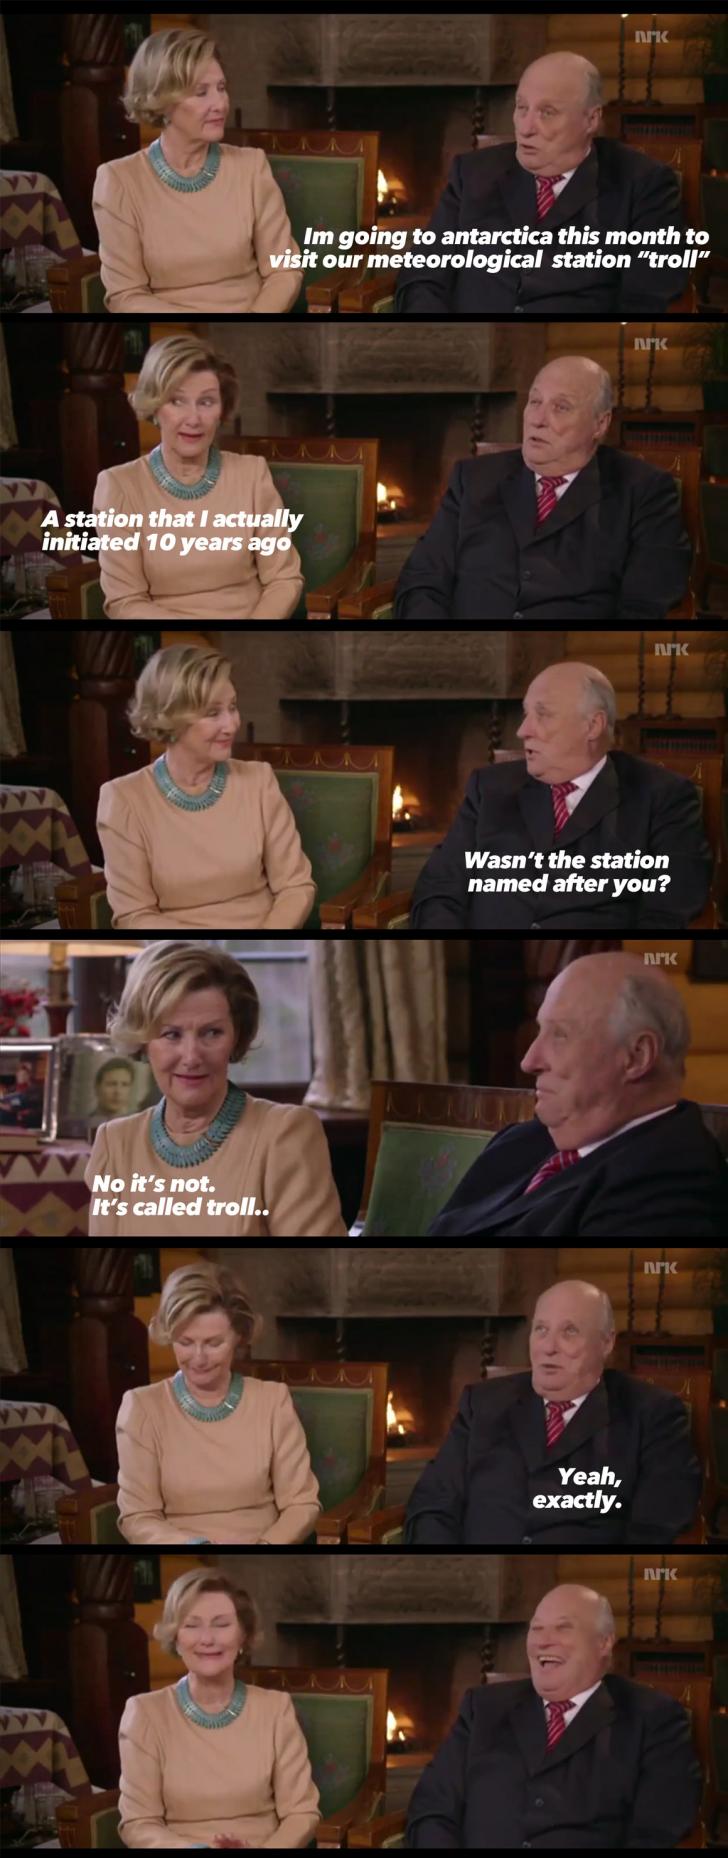 Harald V, king of Norway. Here's a joke he made on national television a few years ago. The lady is his wife, the queen of Norway